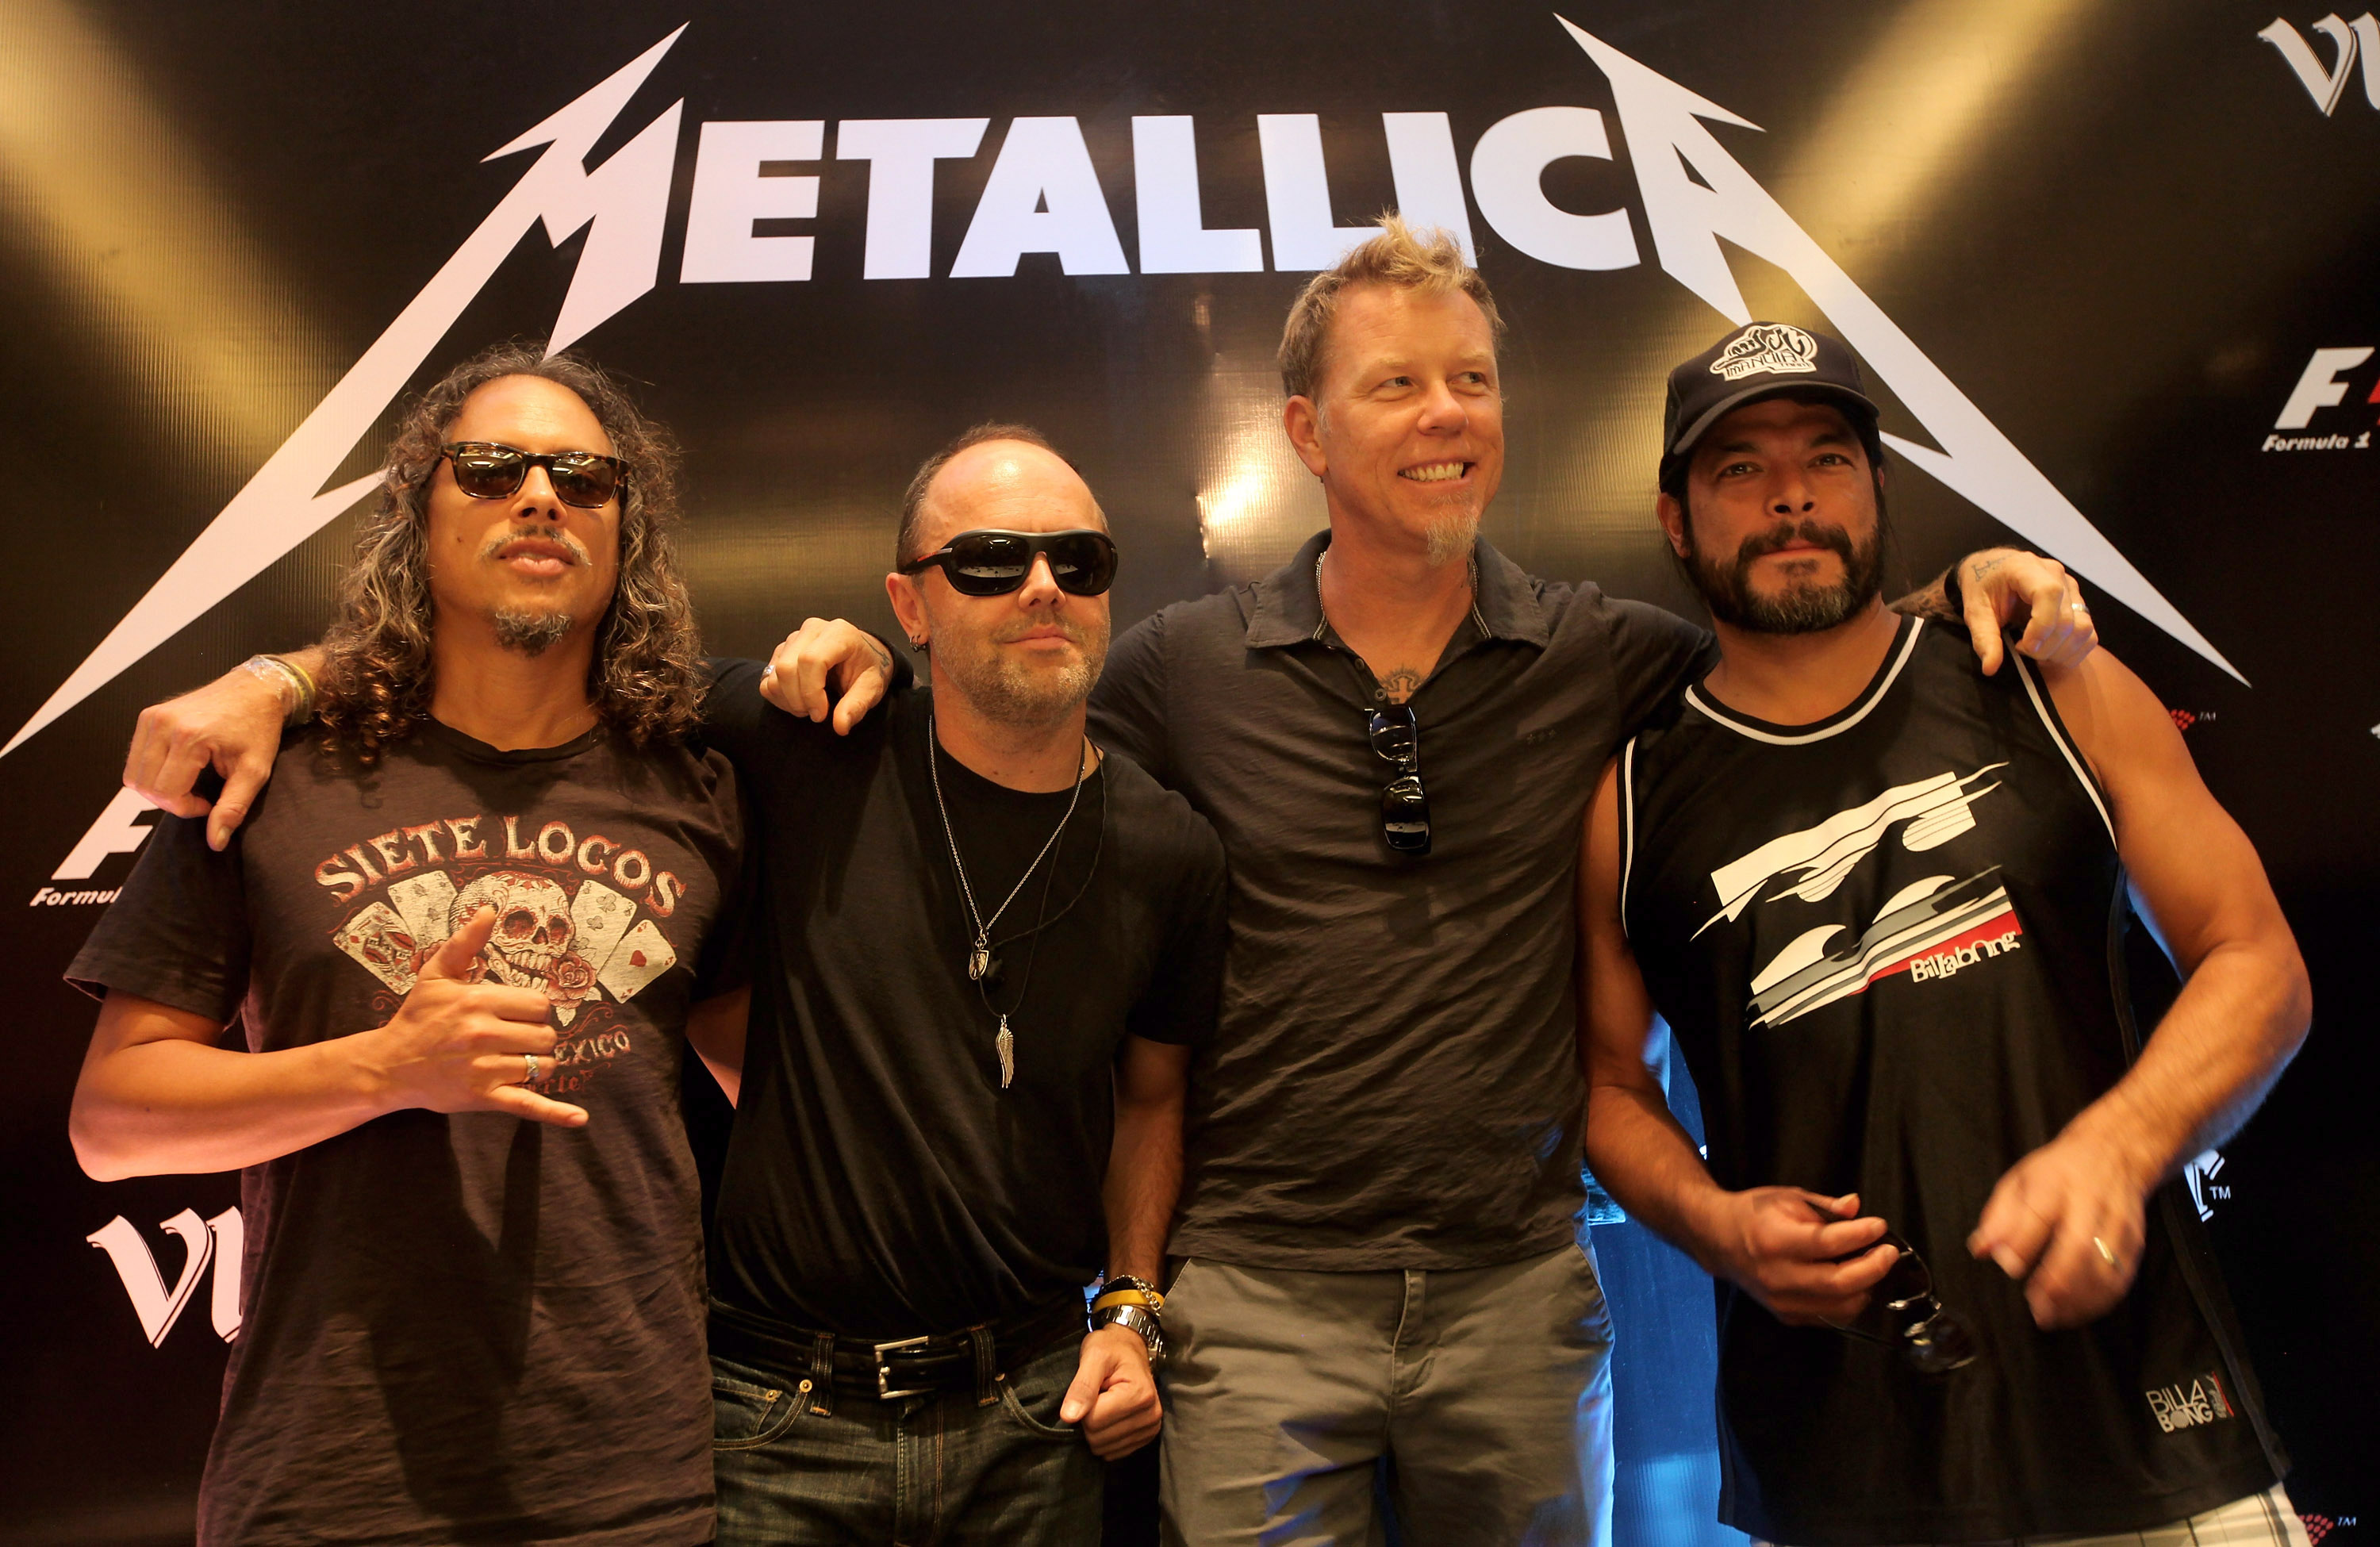 Metallica in front of a black background